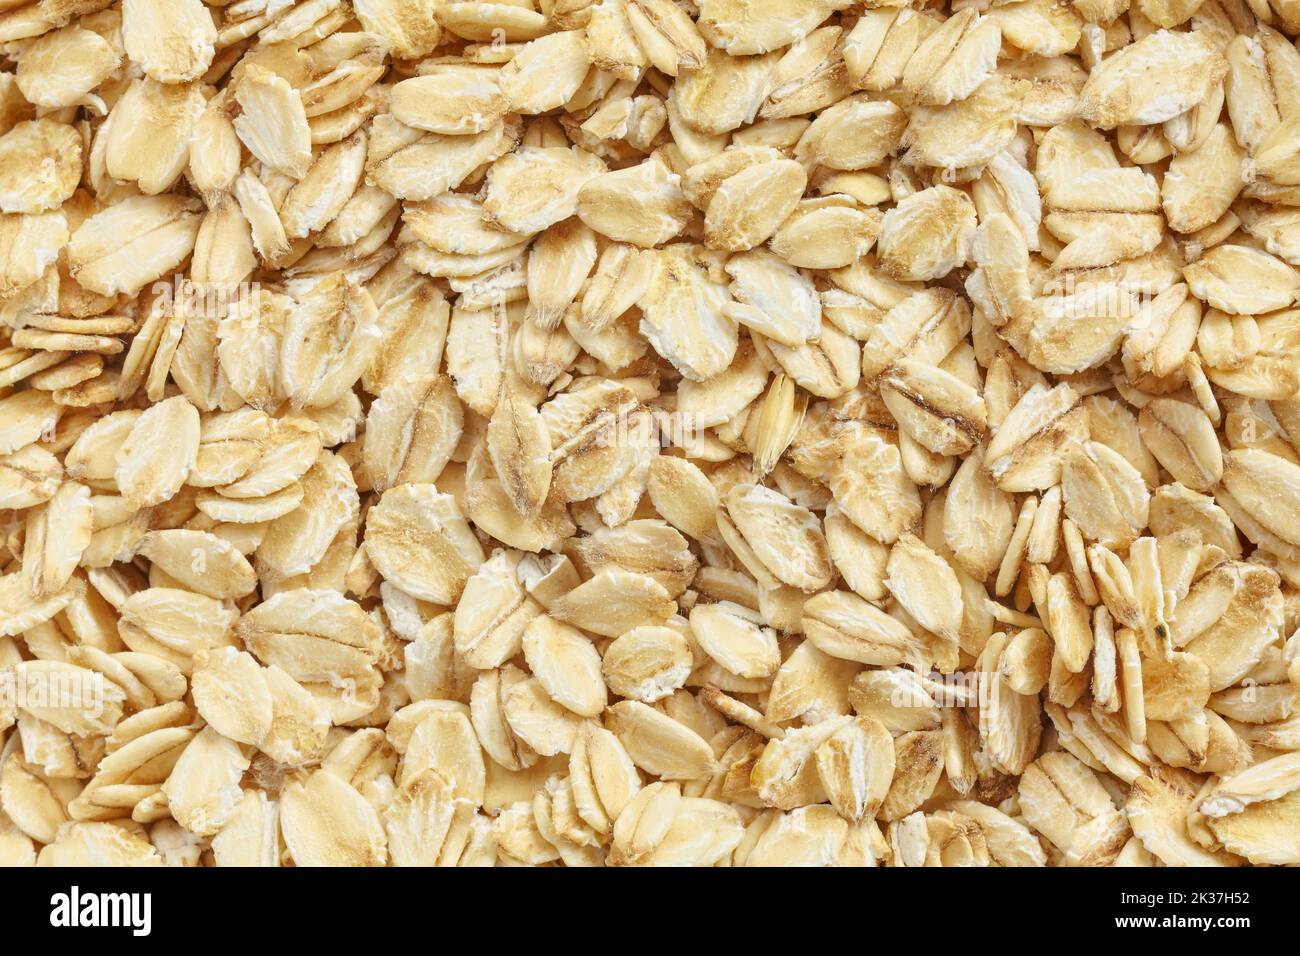 Close up picture of thick rolled oats. Stock Photo